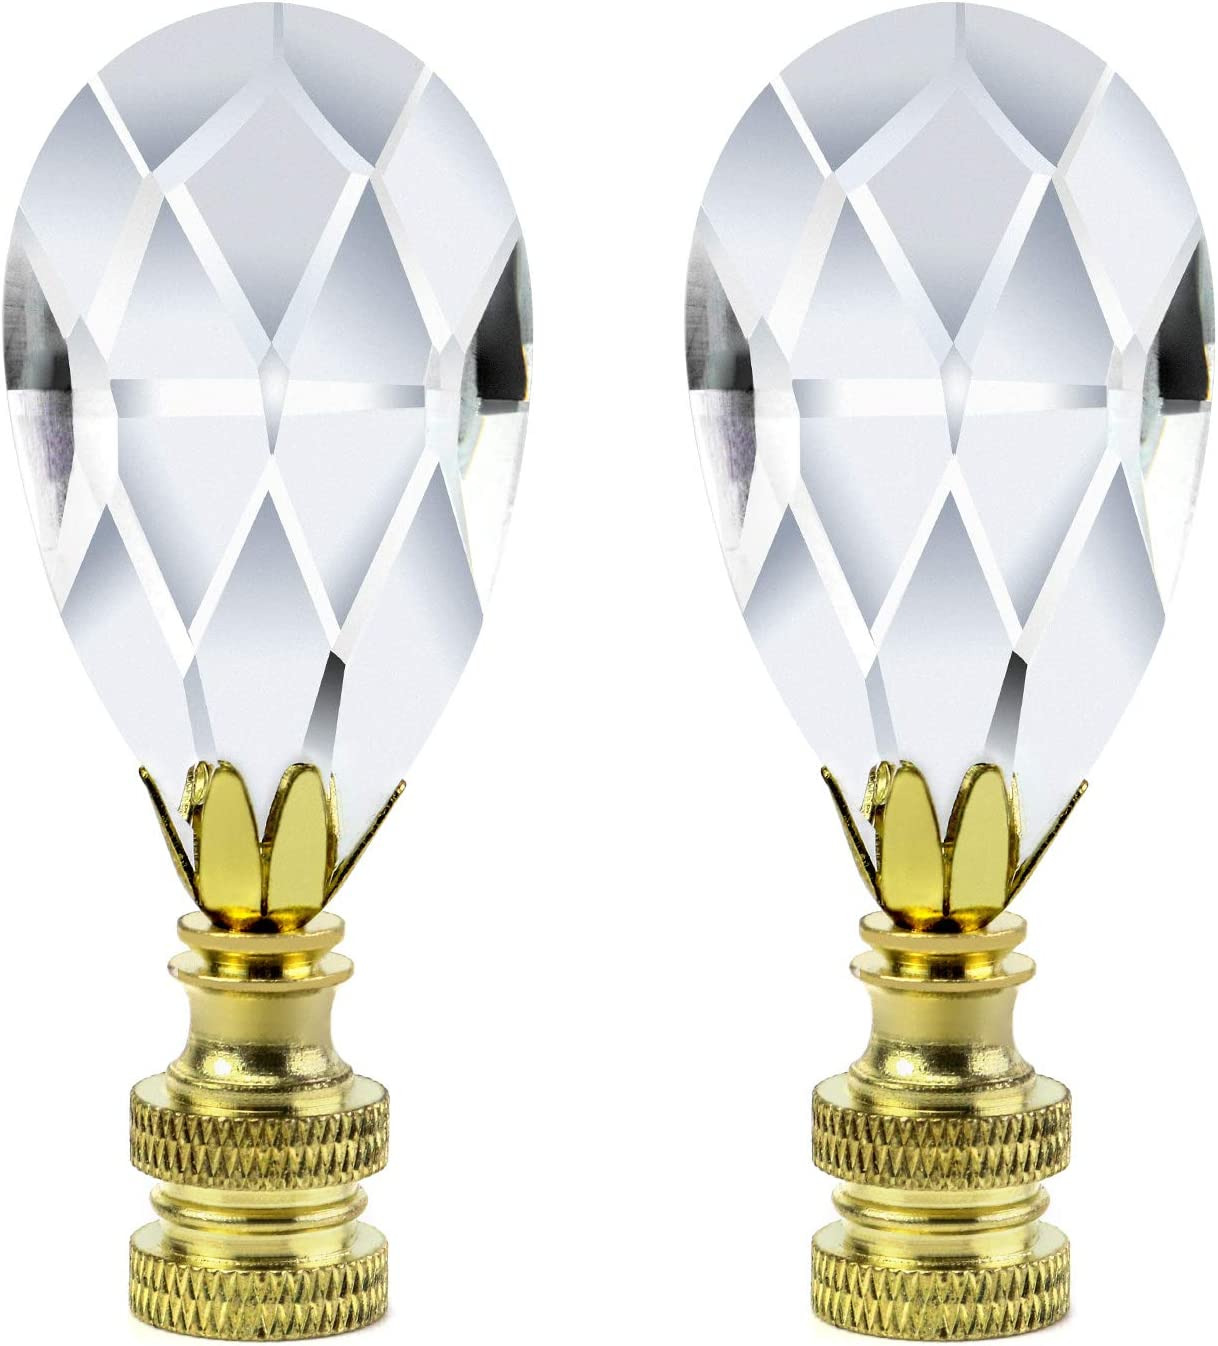 Crystal Lamp Finials, 2 Pack Teardrop Shape Clear Faceted Crystal Lamp, New